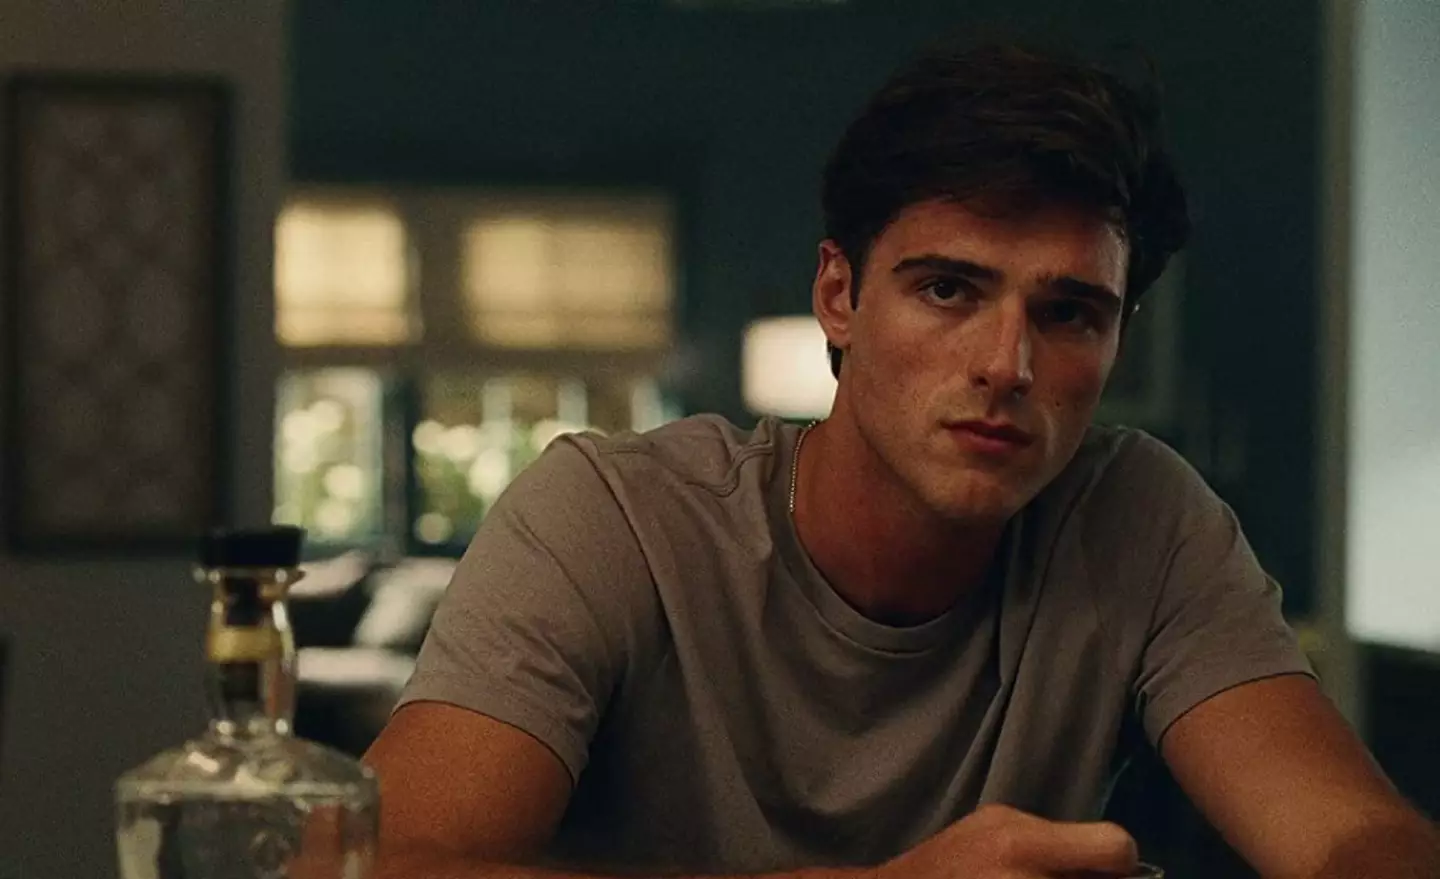 Jacob Elordi is best known for playing Nate Jacobs in Euphoria.